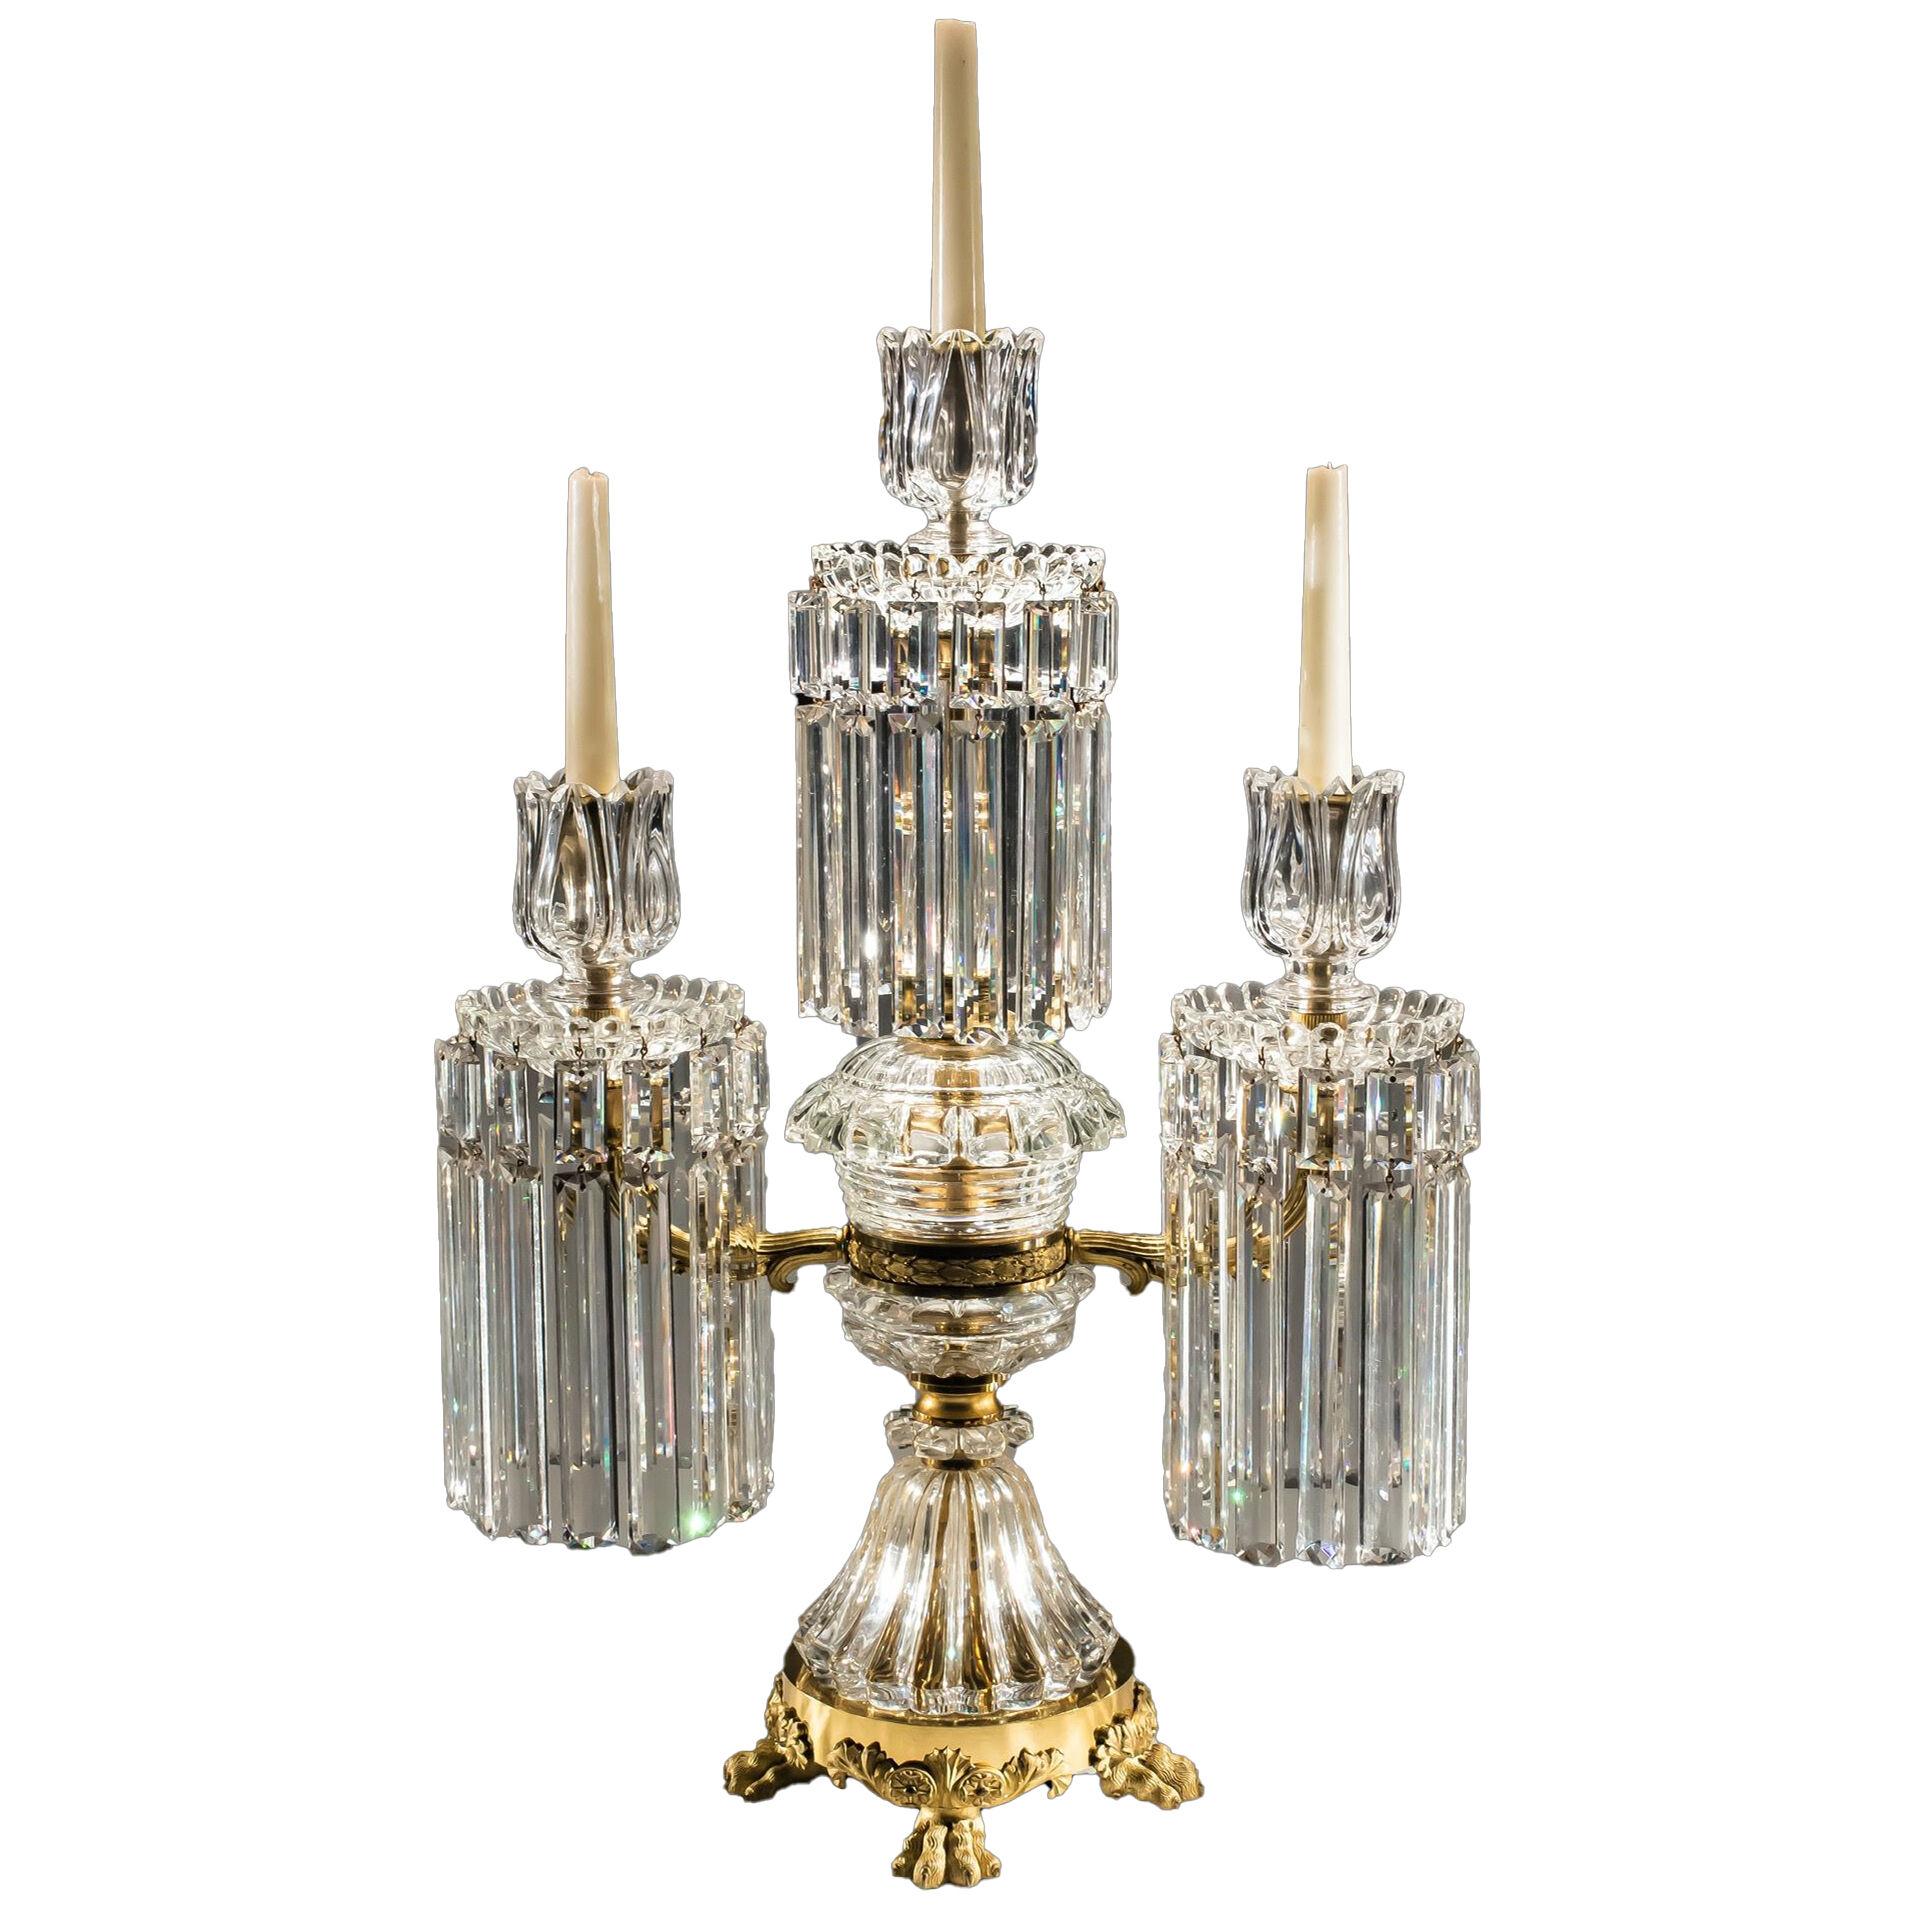 A Exceptionally Large Ormolu Mounted Three Light Candelabra by John Blades